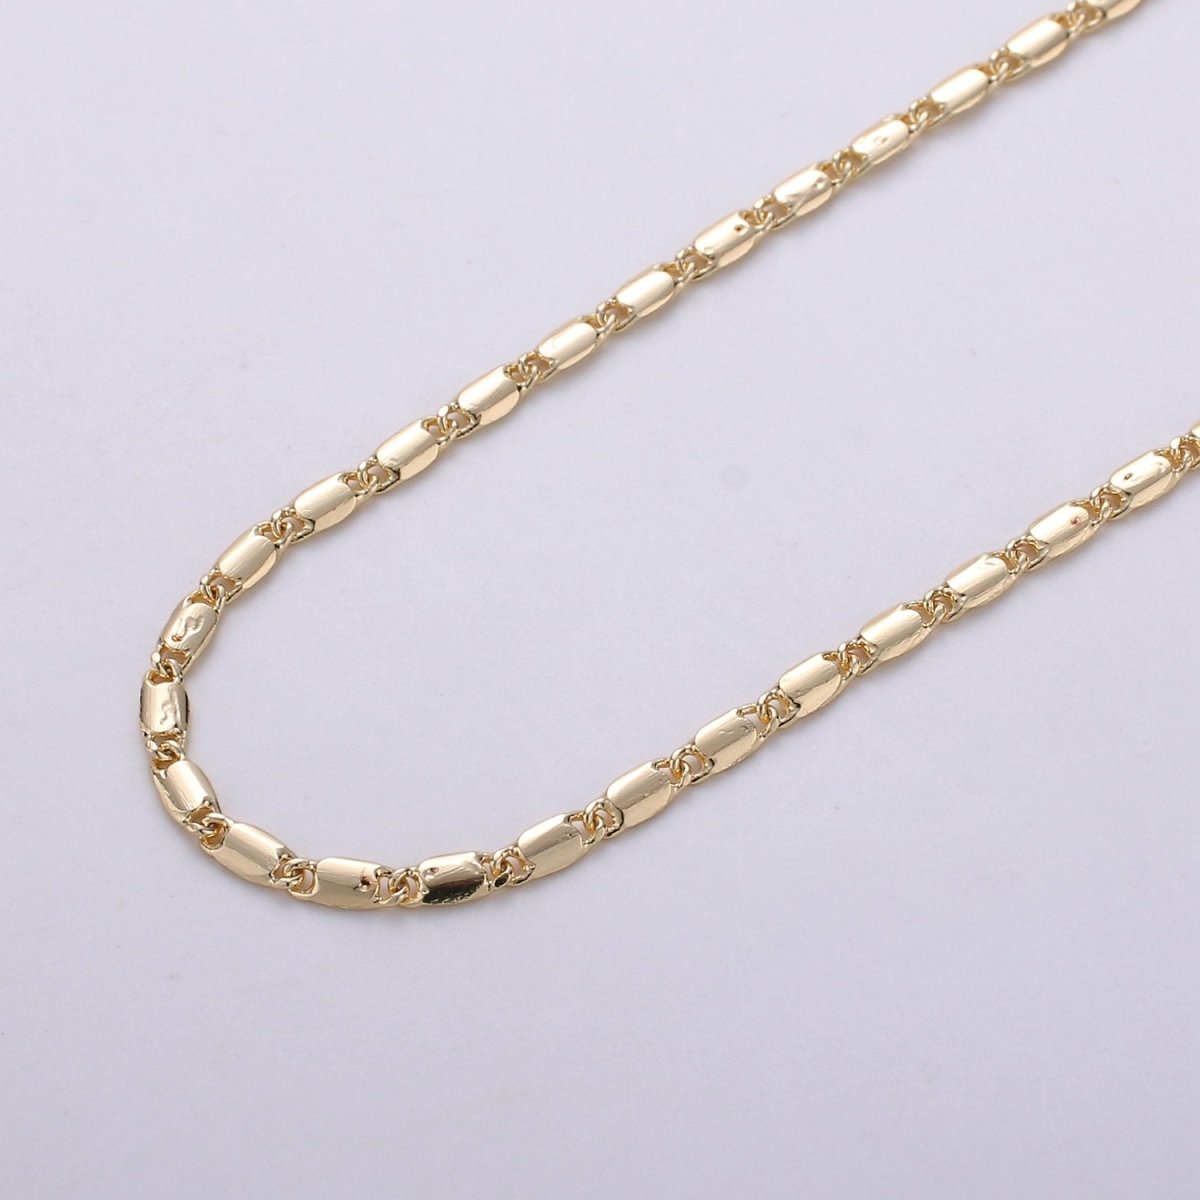 24K Gold Filled Flat Bar Unique Chain, 3mm Unique Lock Chain By Yard, For Necklace, Bracelet, Anklet Supply Component | ROLL-266 ROLL-822 - DLUXCA